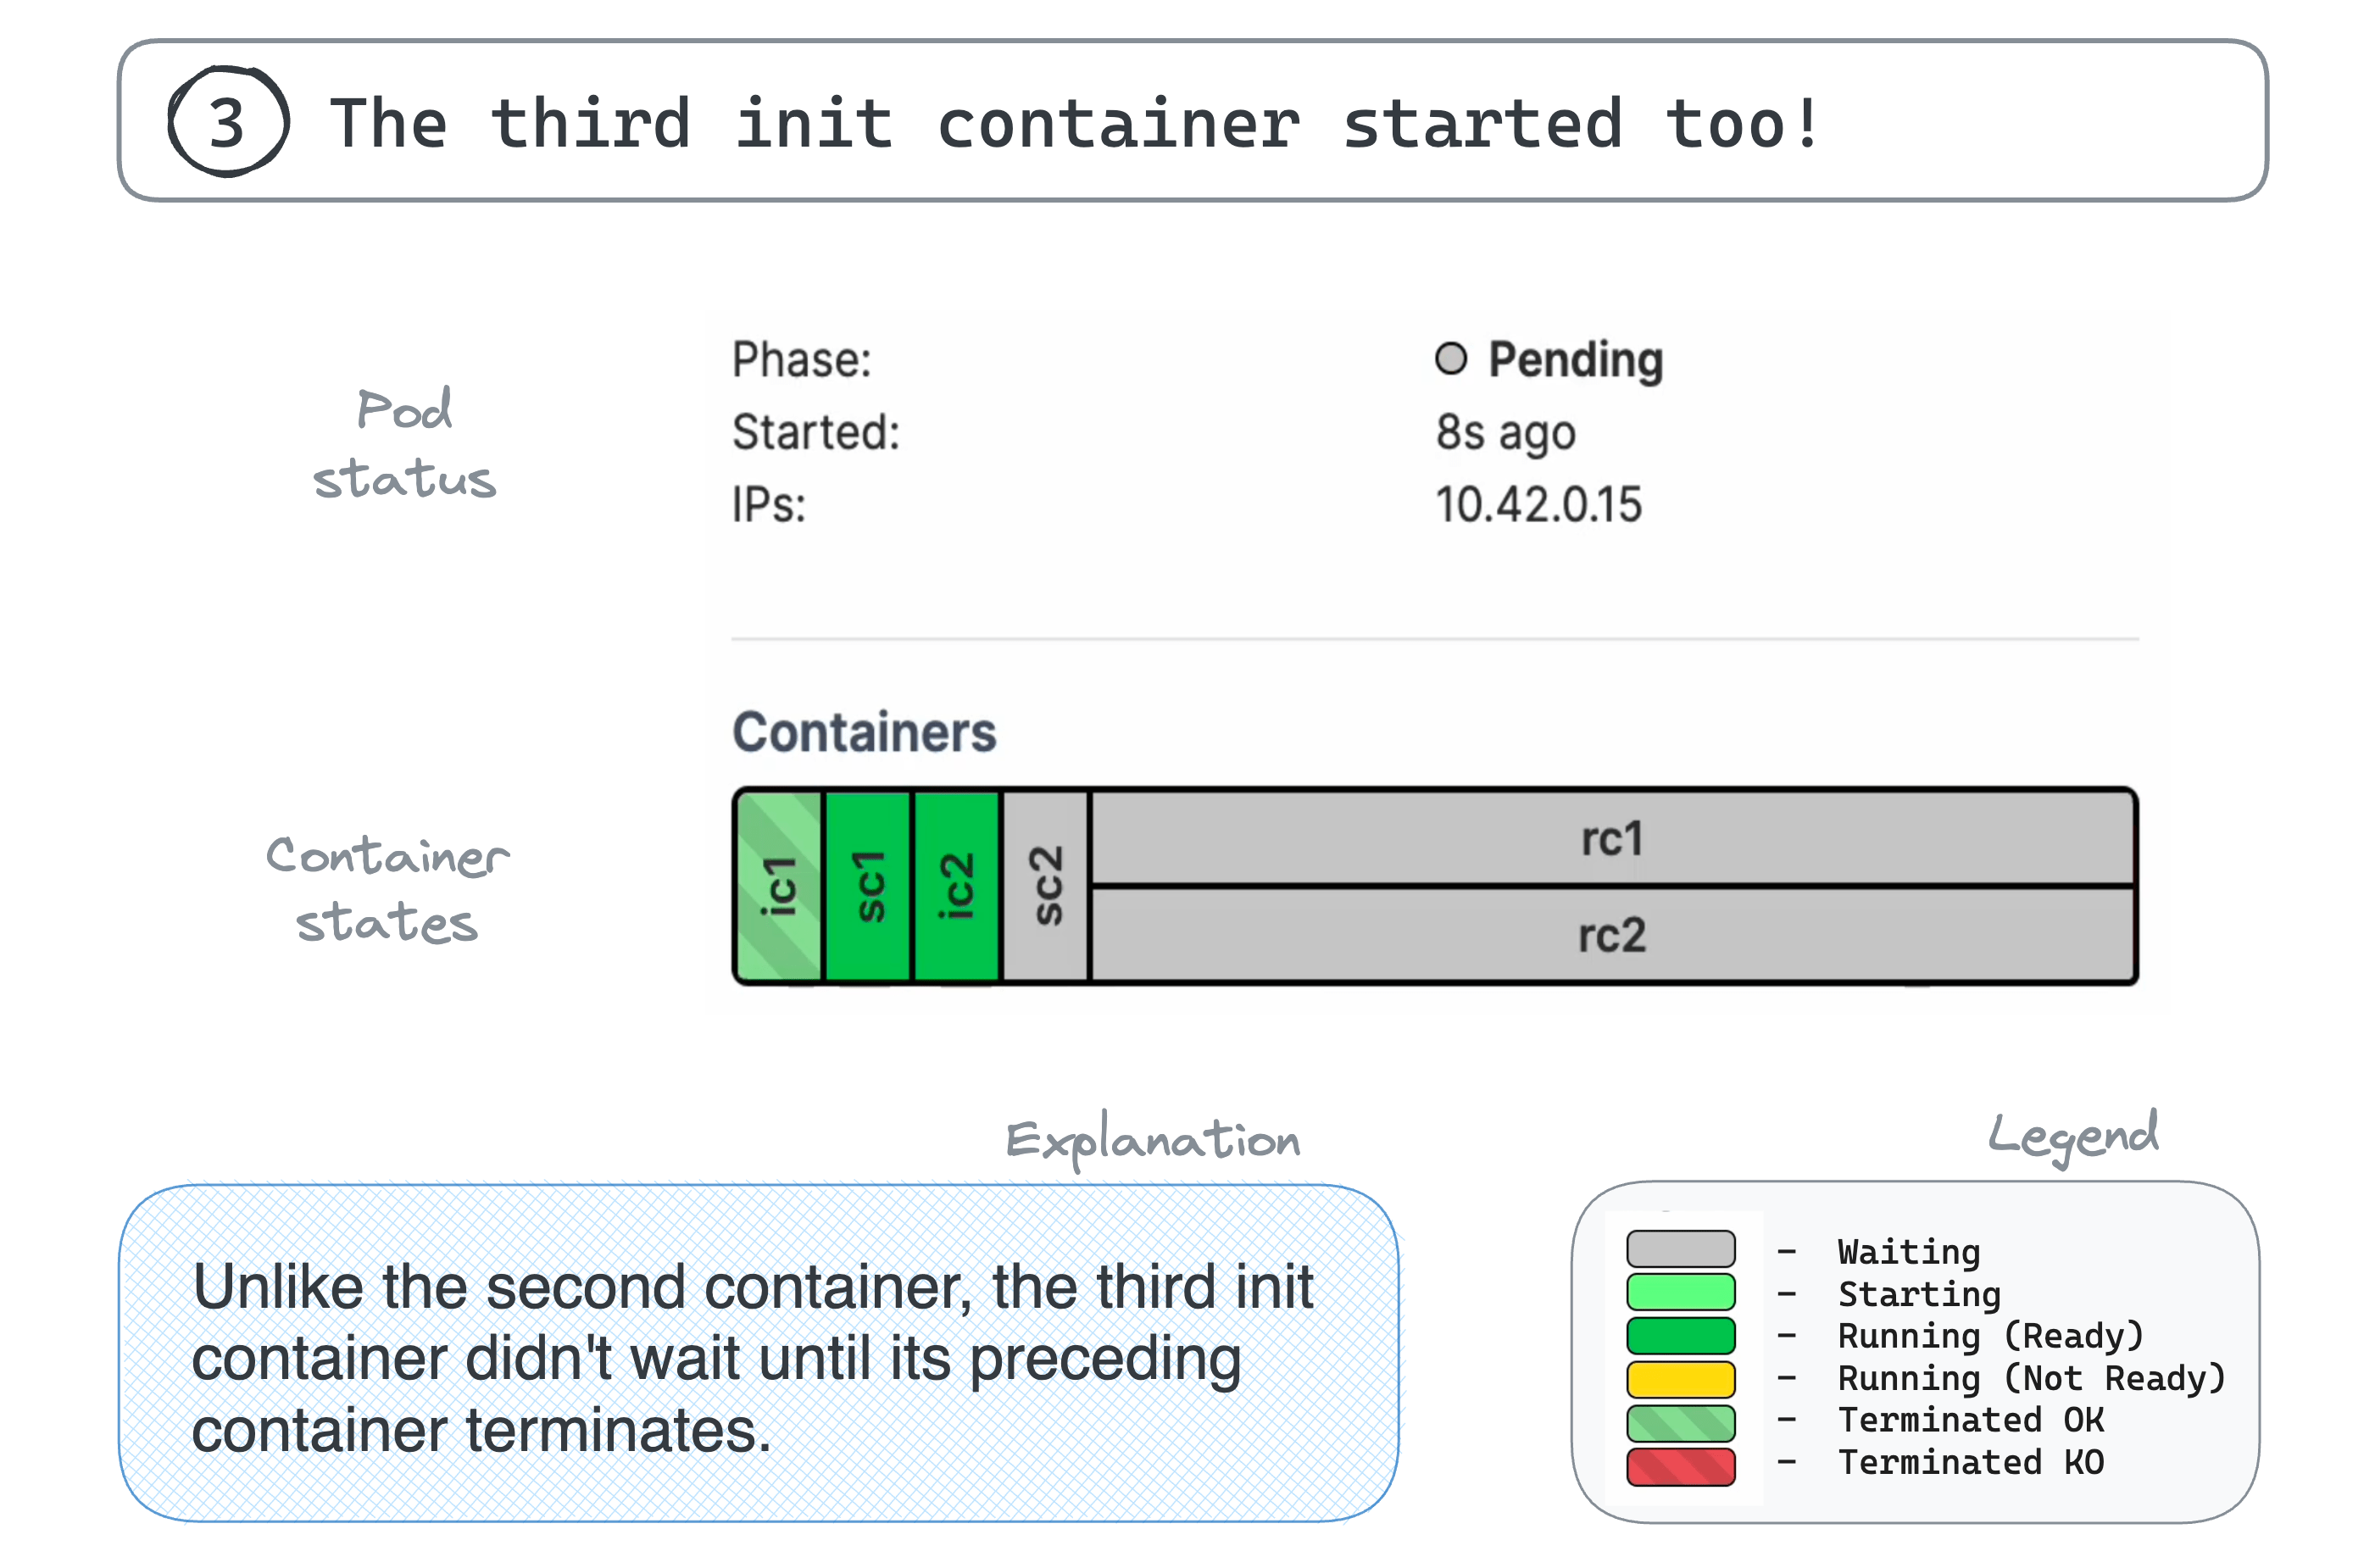 3. The third init container started too!